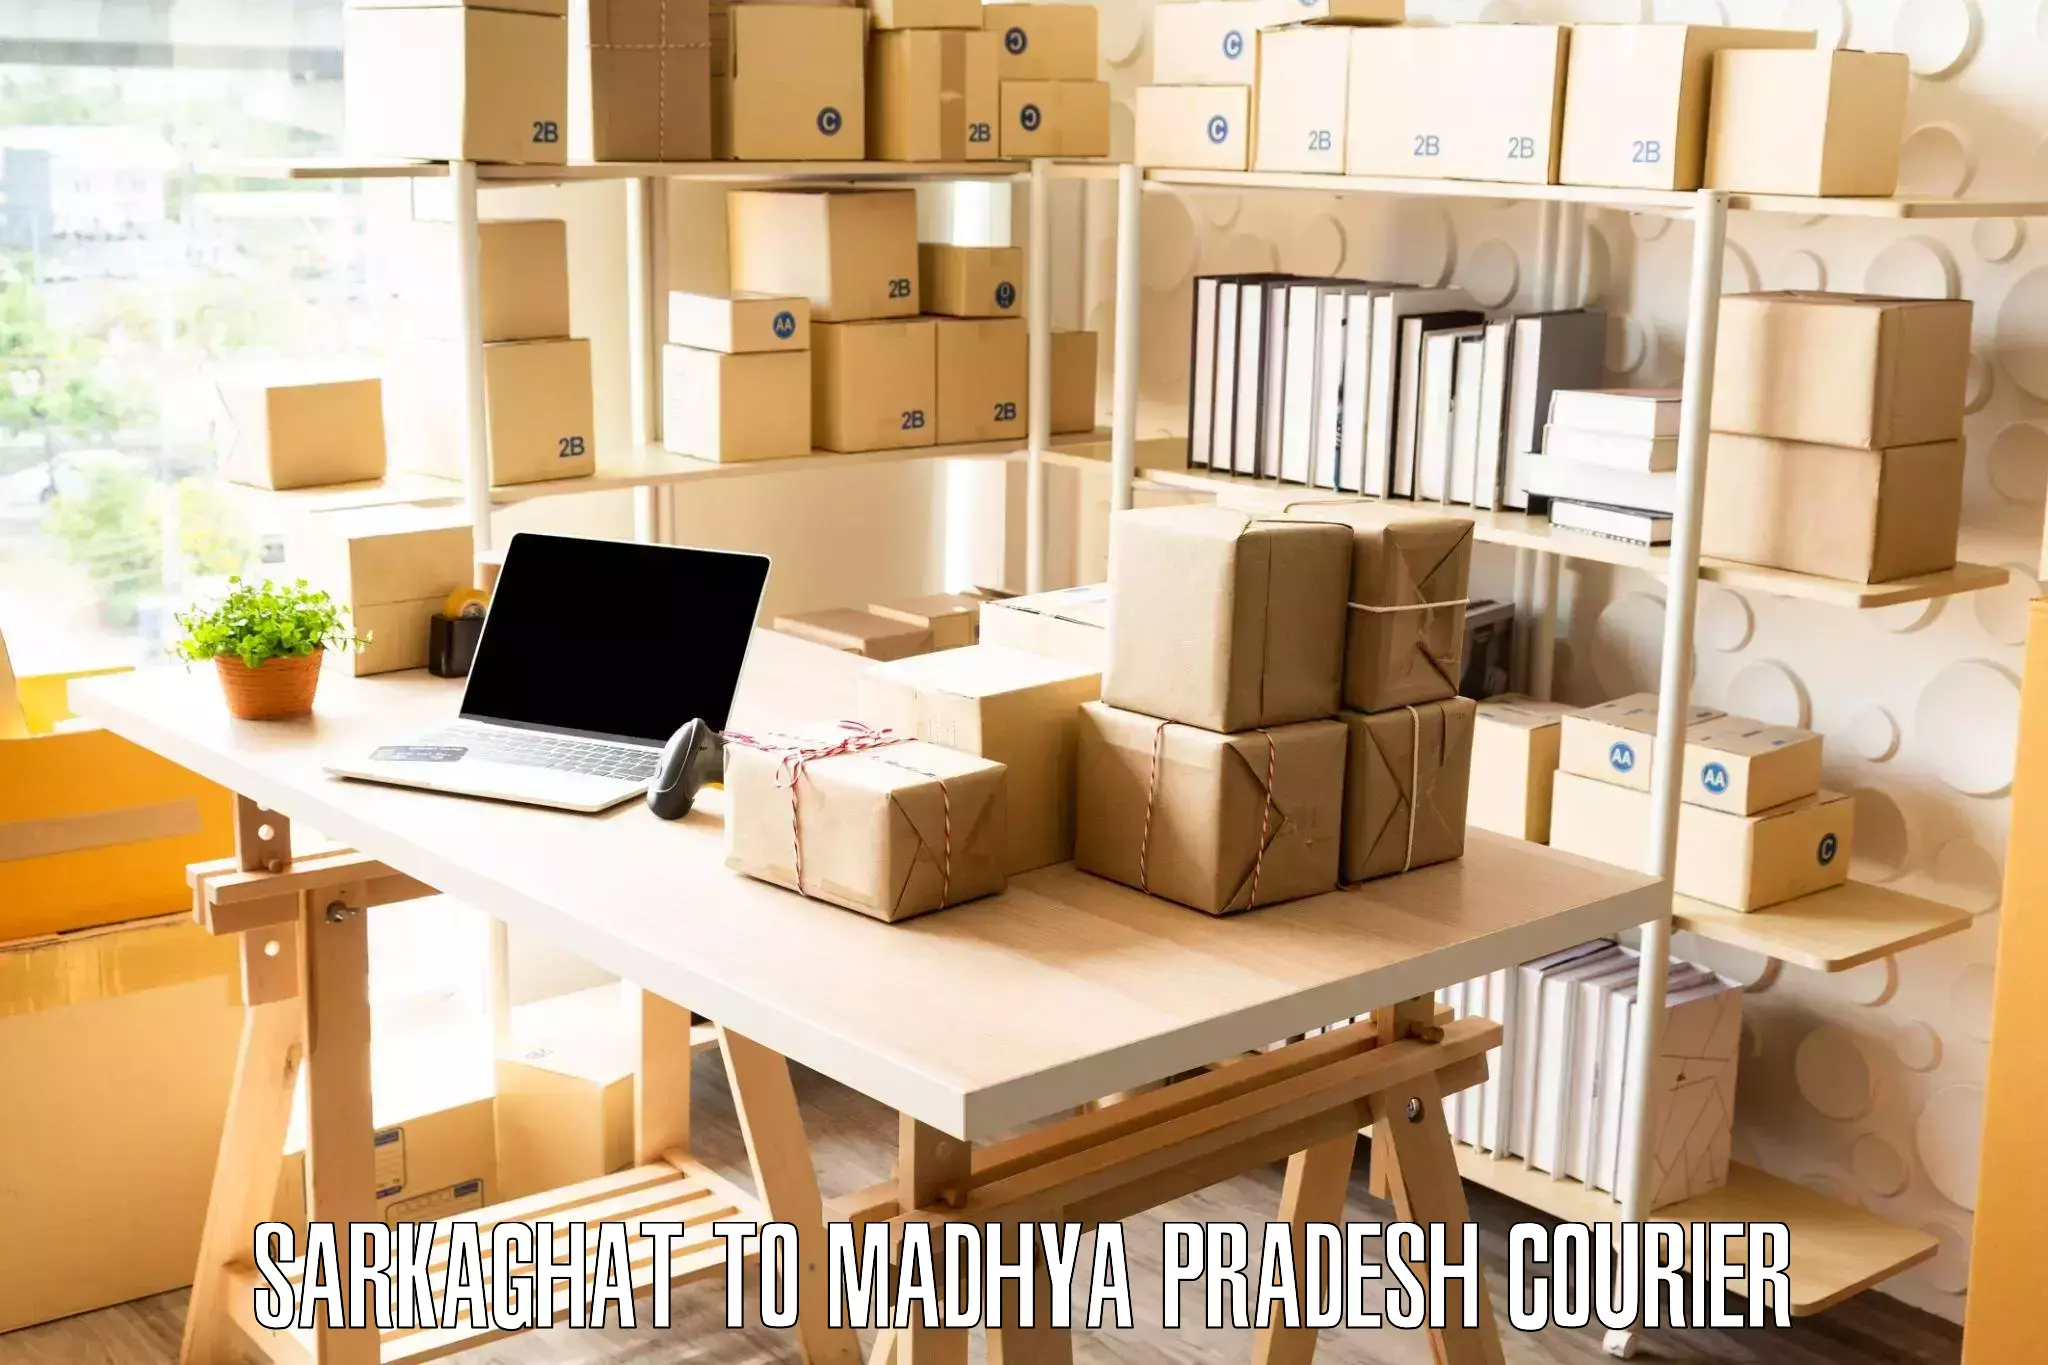 Residential moving experts Sarkaghat to Ujjain